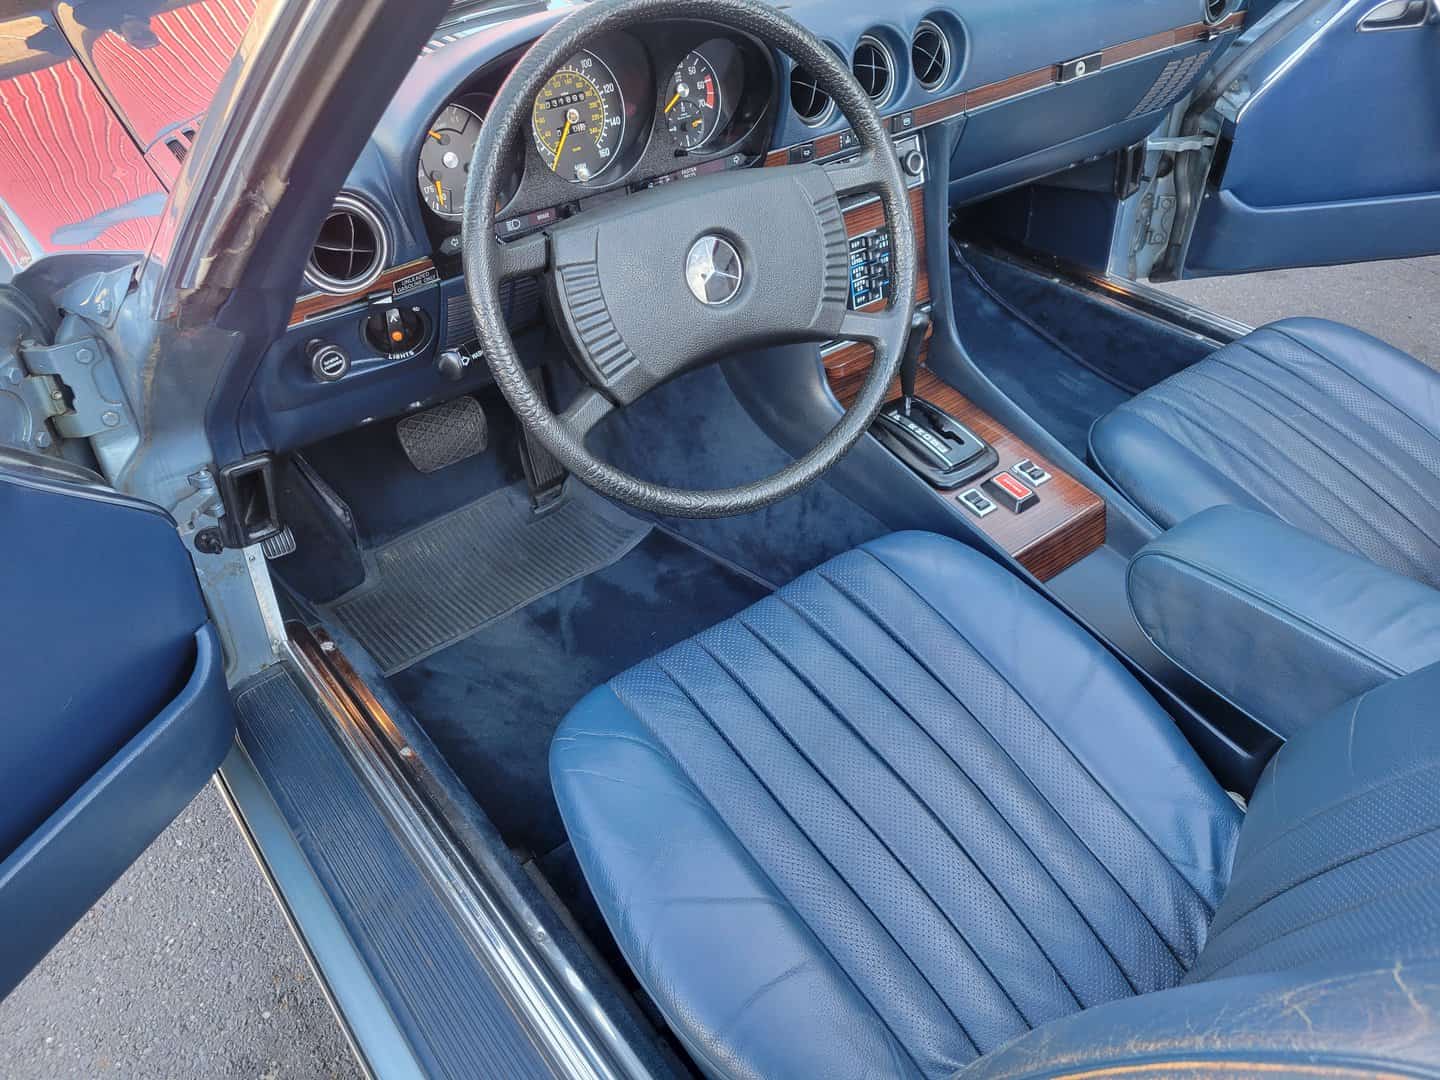 The Interior Of A 1979 Mercedes Benz 450 Sl, Featuring Blue Leather Seats And A Matching Steering Wheel.